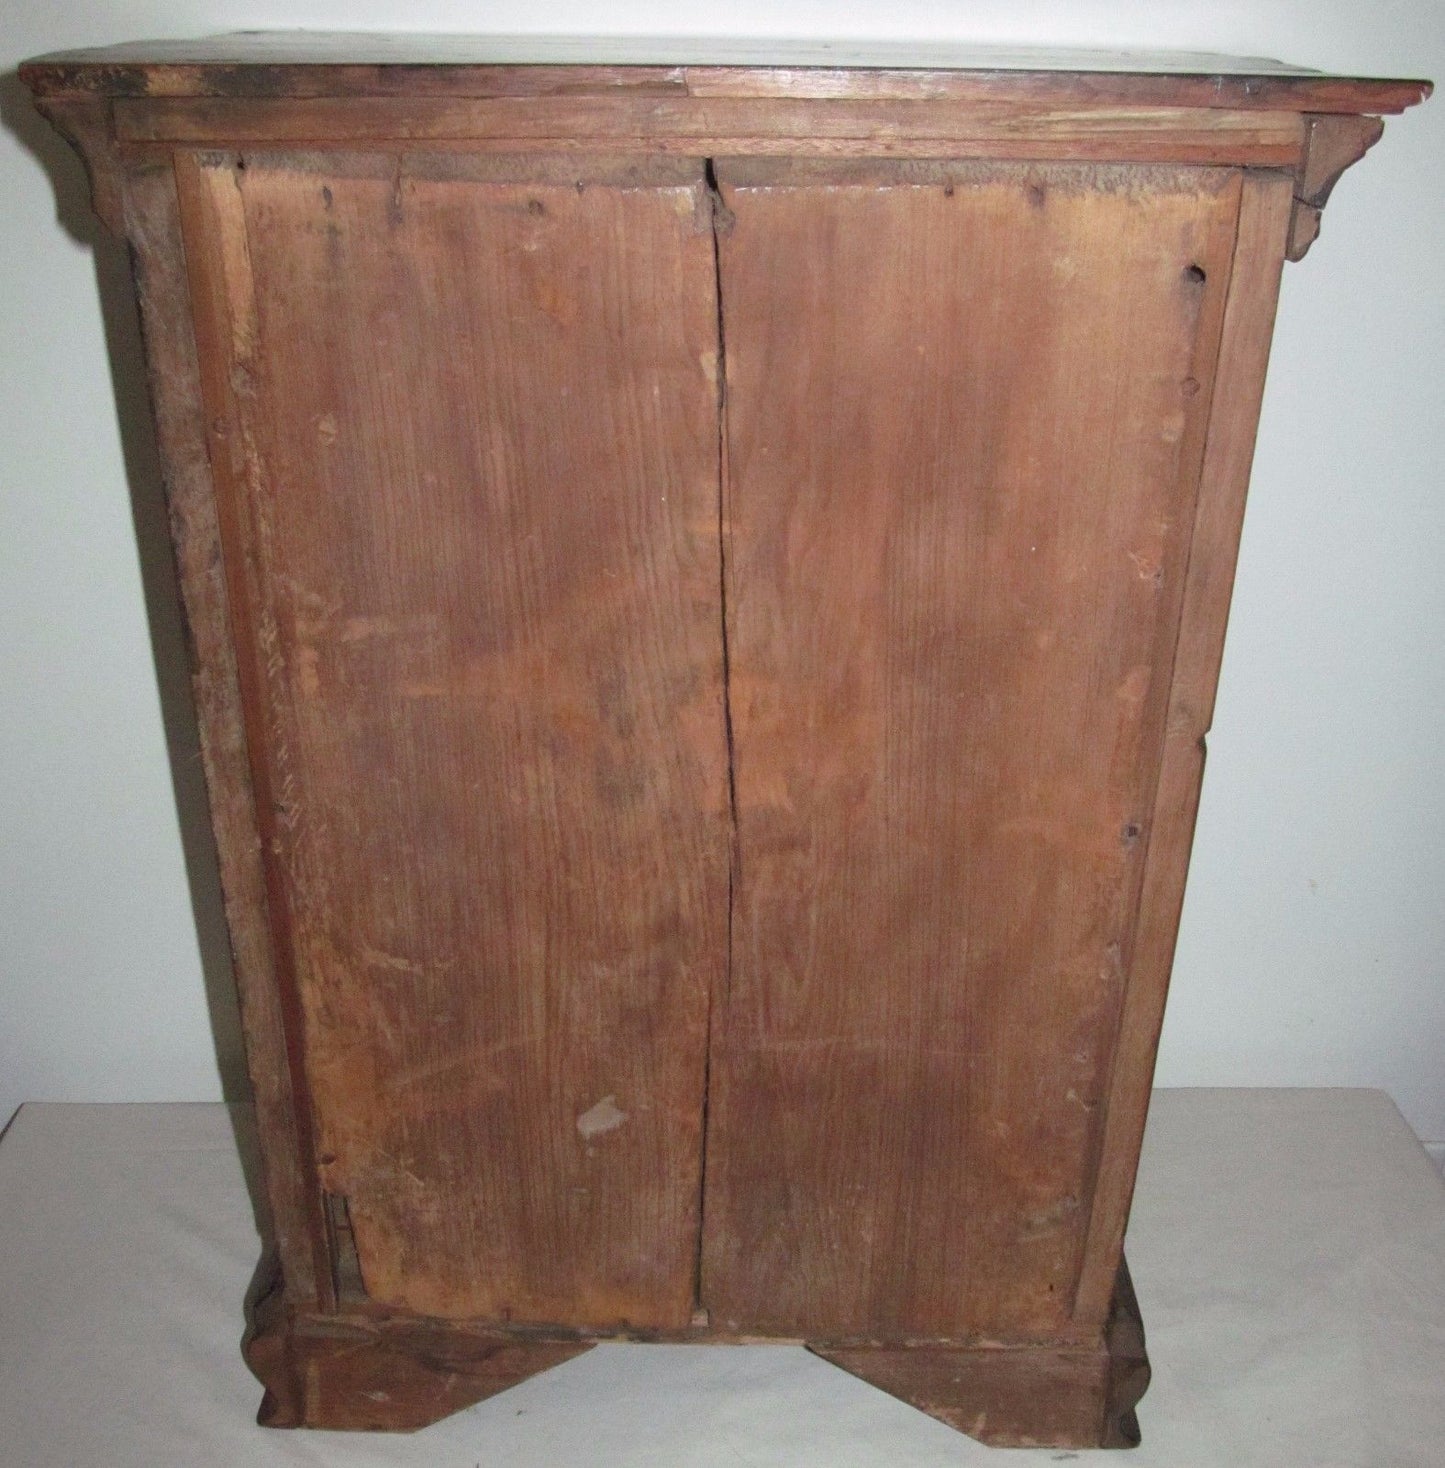 IMPORTANT 18TH CENTURY QUEEN ANNE PERIOD WALNUT SPICE CHEST WITH TOMBSTONE DOOR